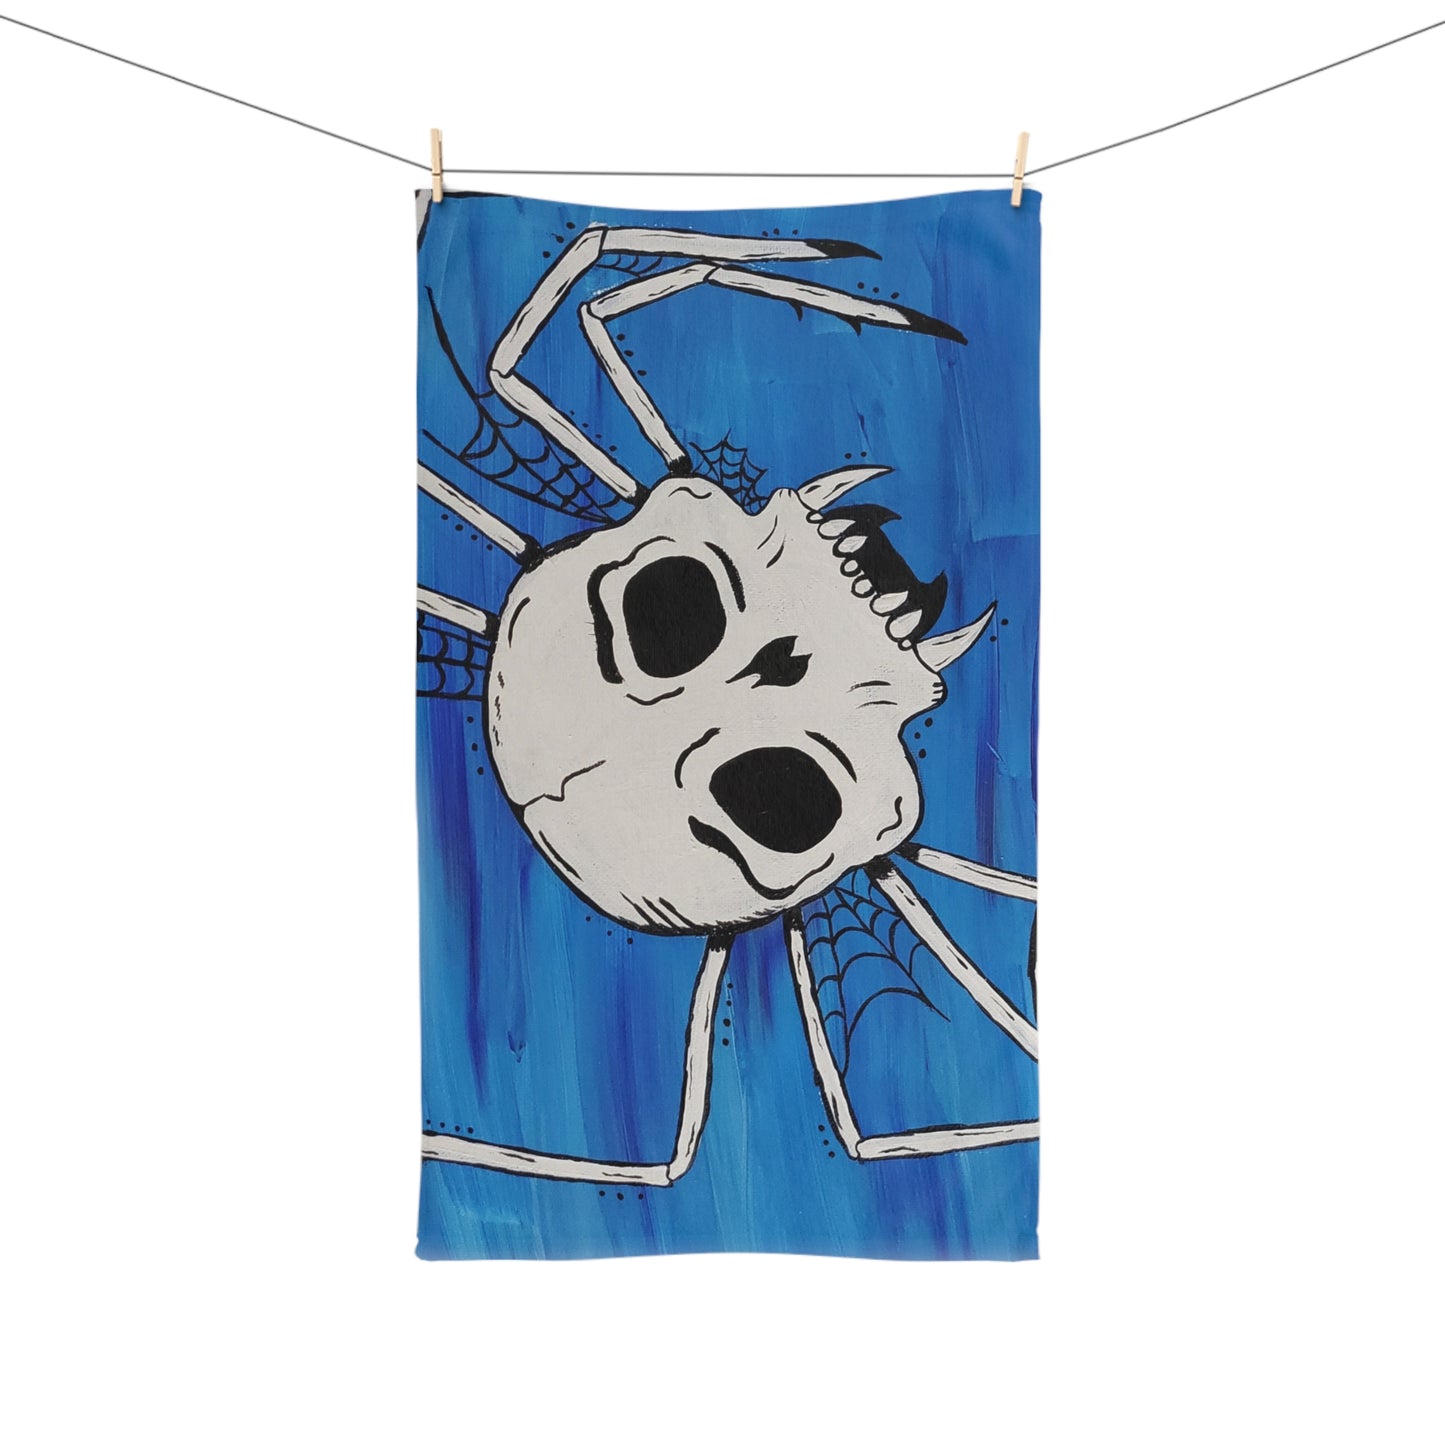 Mikey Hand Towel (Peculiar Paintings Collection)